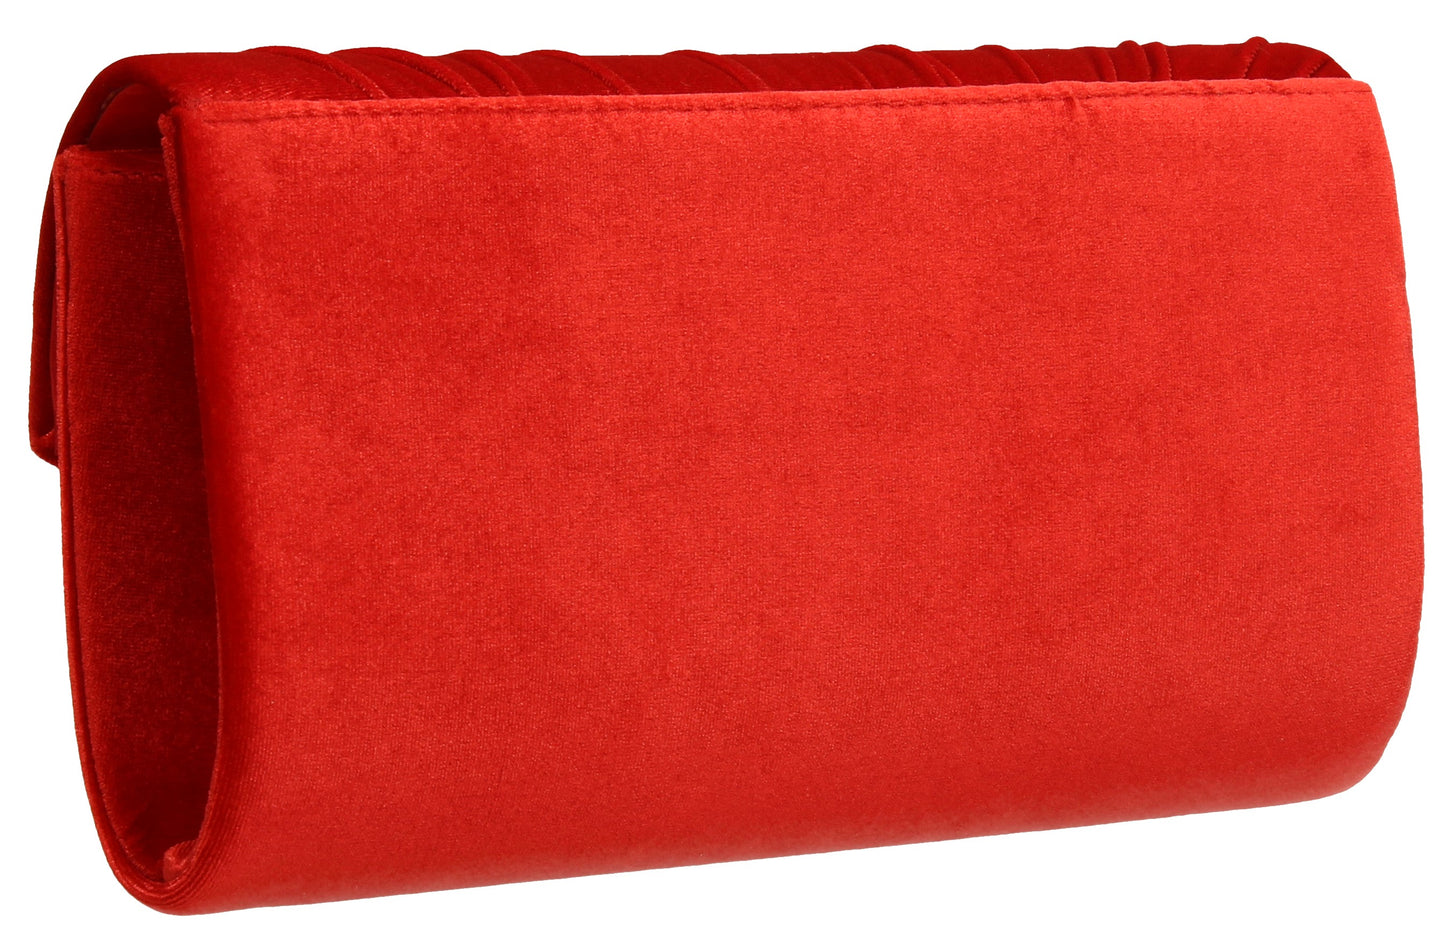 SWANKYSWANS Jess Clutch Bag Red Cute Cheap Clutch Bag For Weddings School and Work